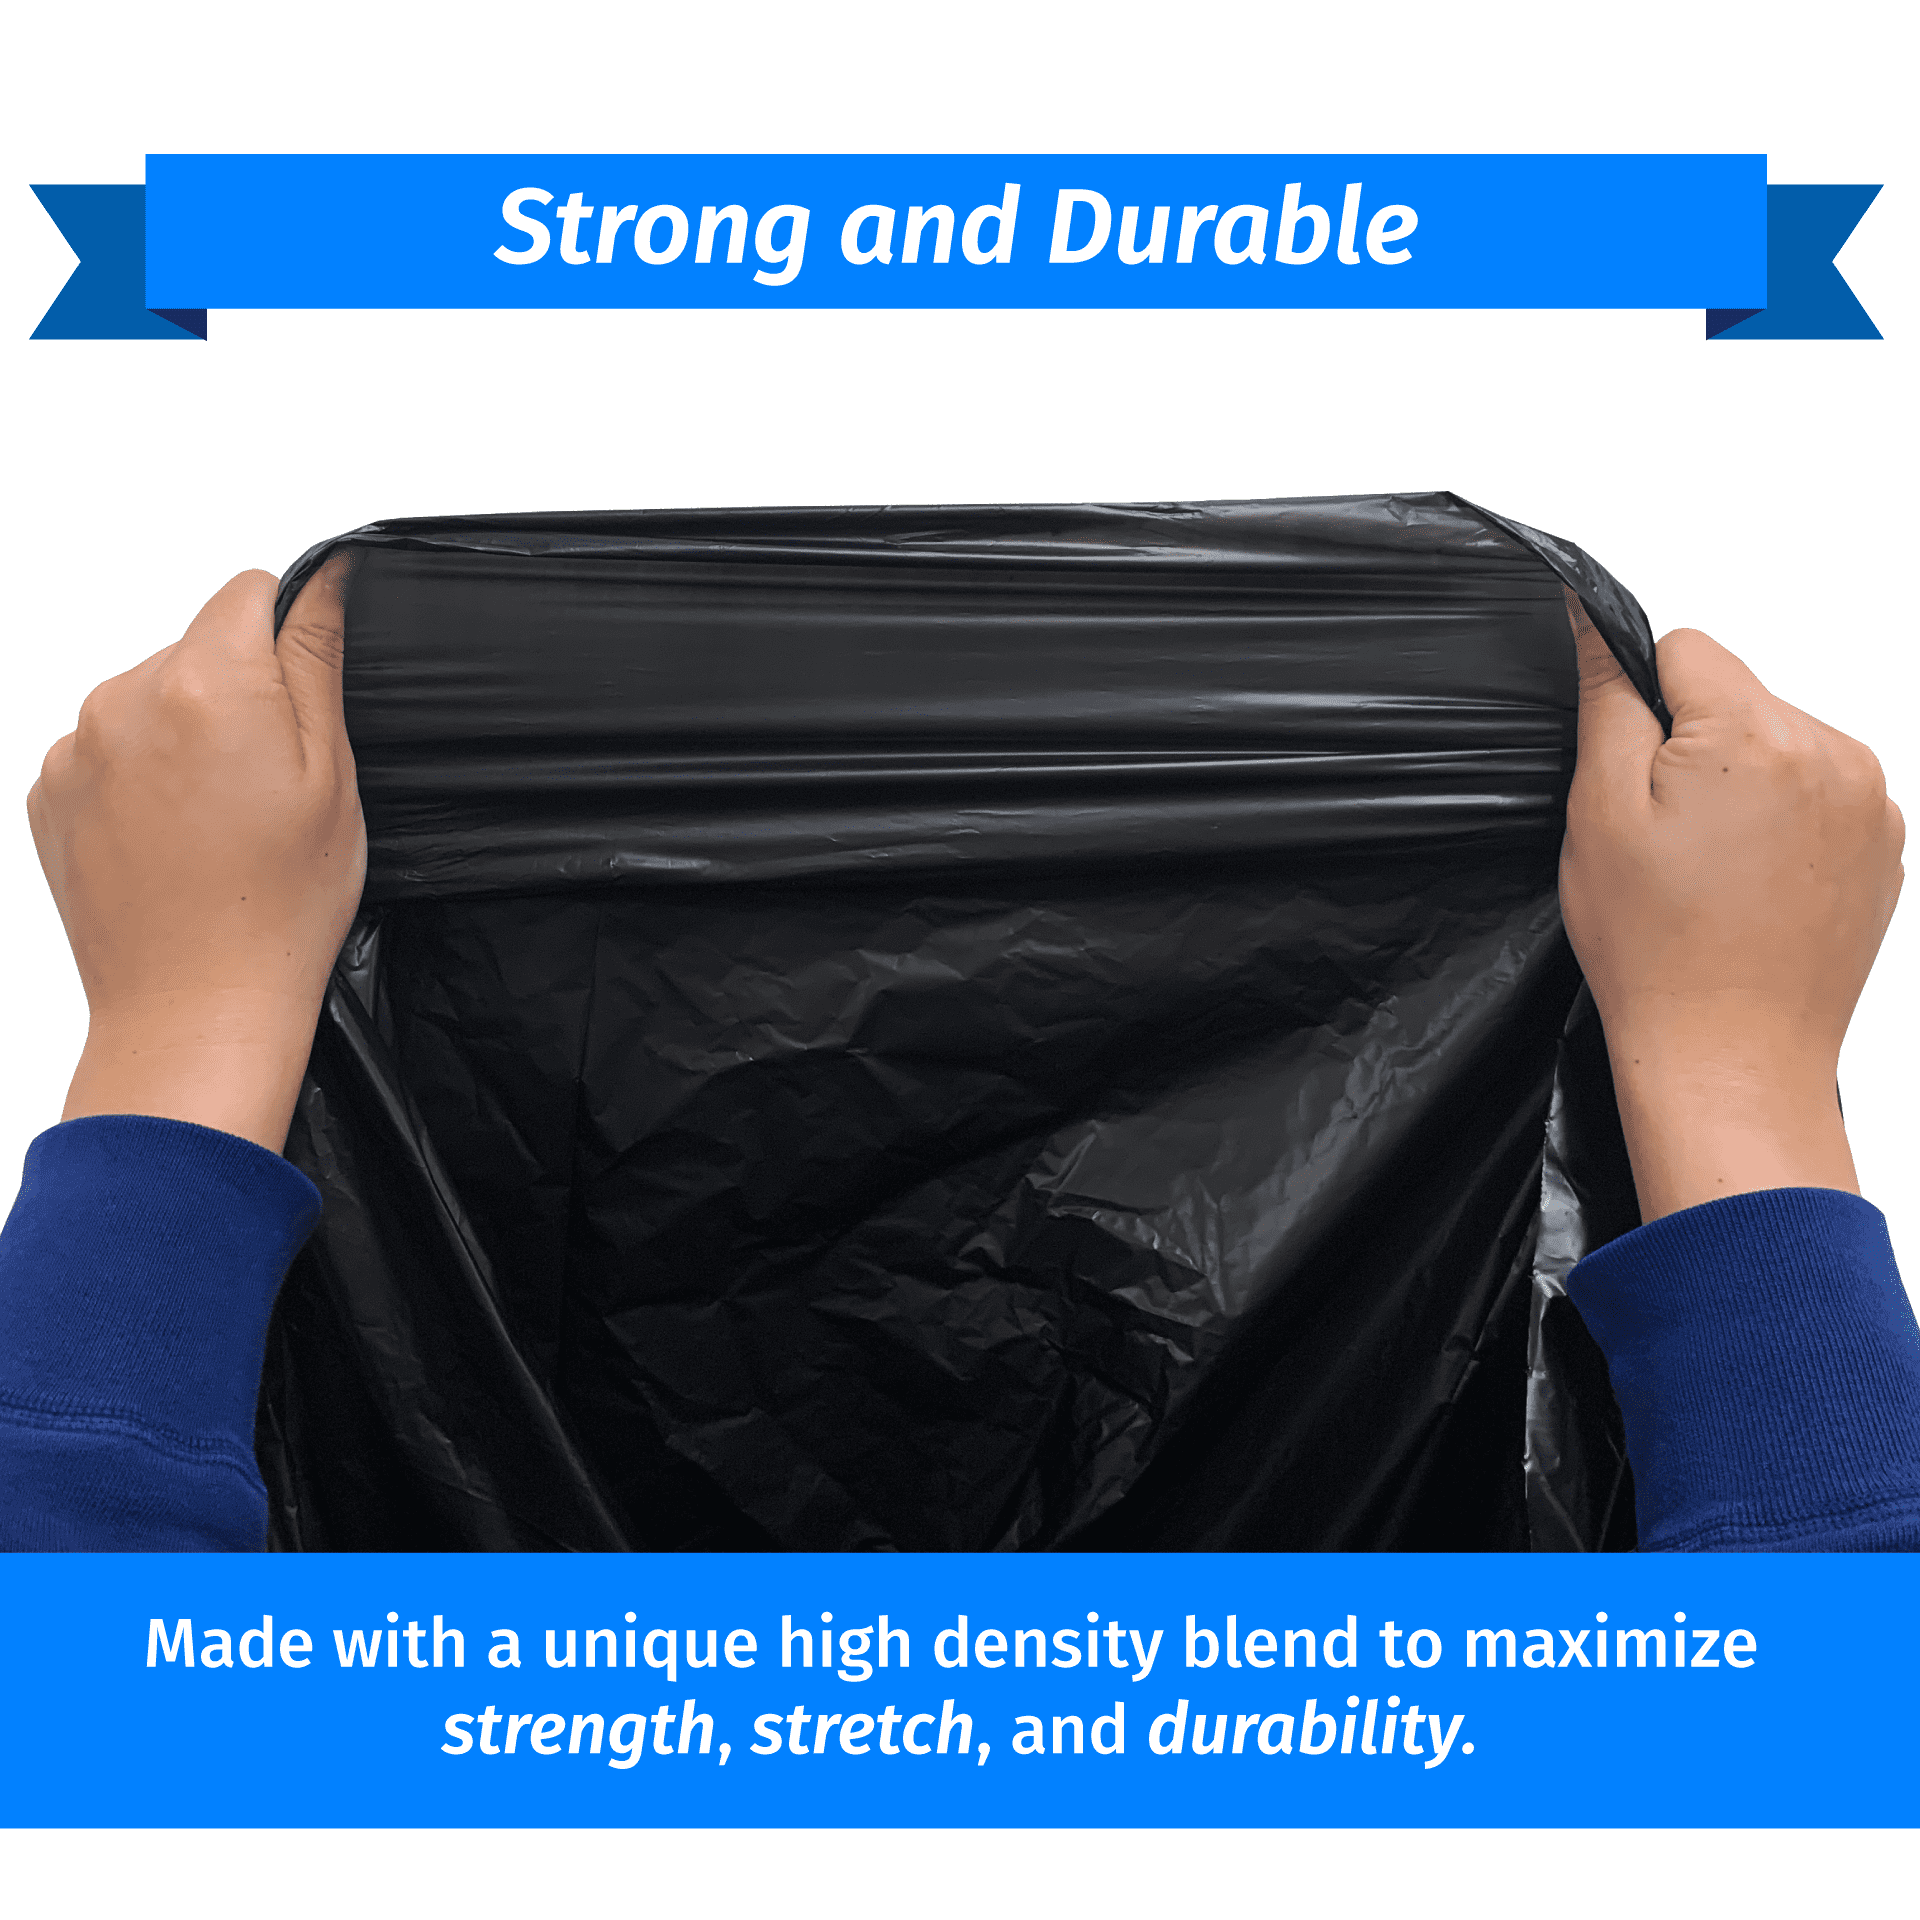 Reli. 95-96 Gallon Trash Bags Heavy Duty | 68 Bags | Extra Large 90, 95,  96, 100 Gallon Can Liners | Black | Huge/Big Trash Bags | Made in USA